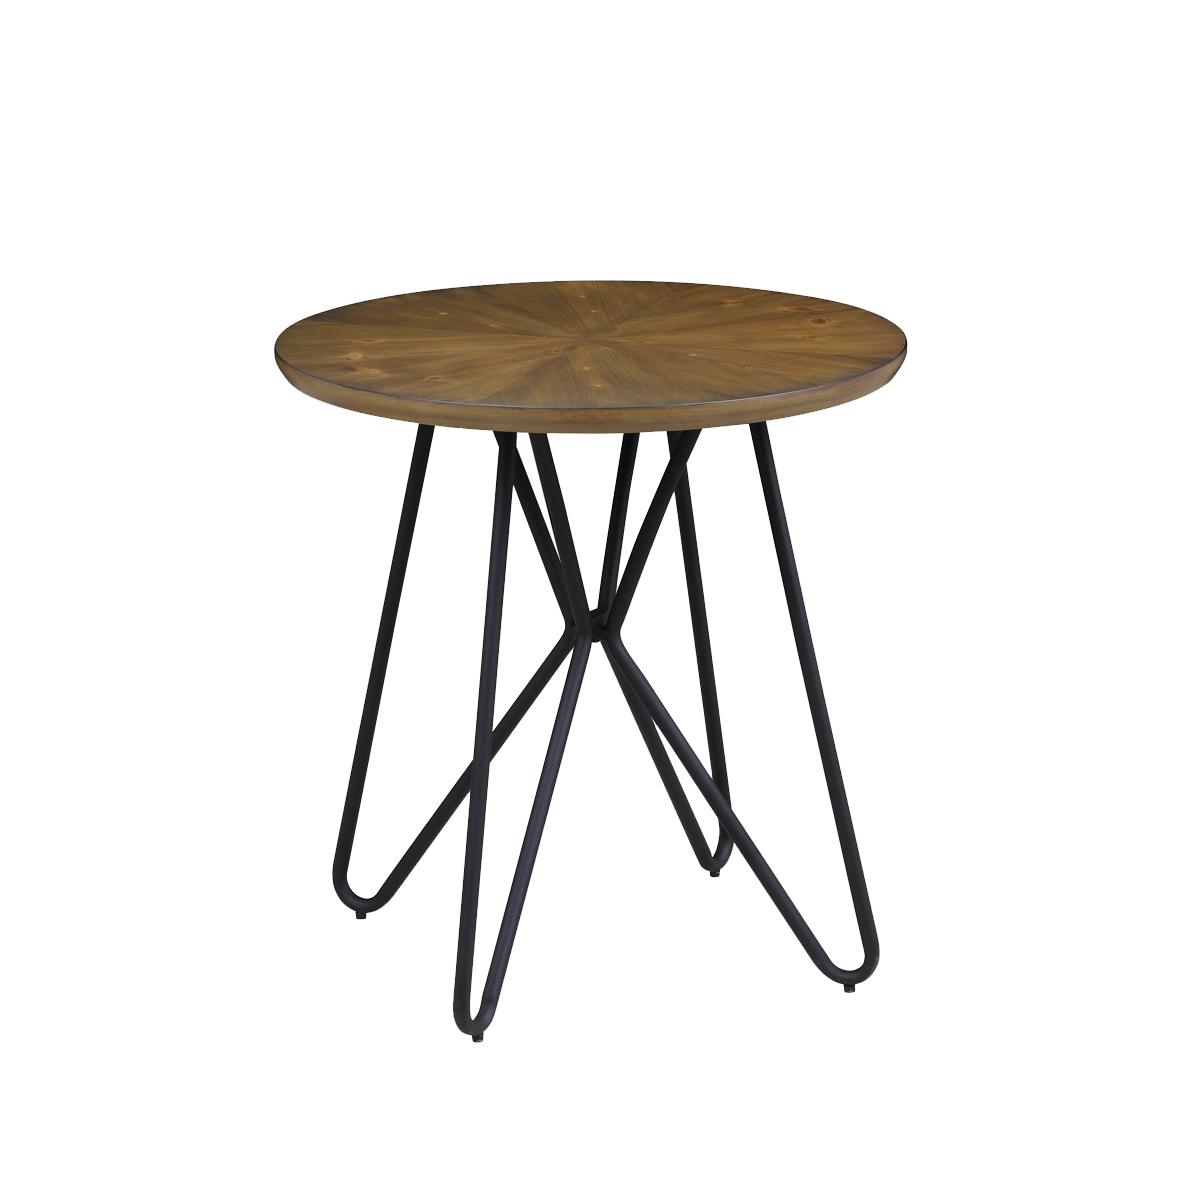 Dual Tone Round Wooden End Table With Metal Hairpin Legs, Brown And Black- Saltoro Sherpi